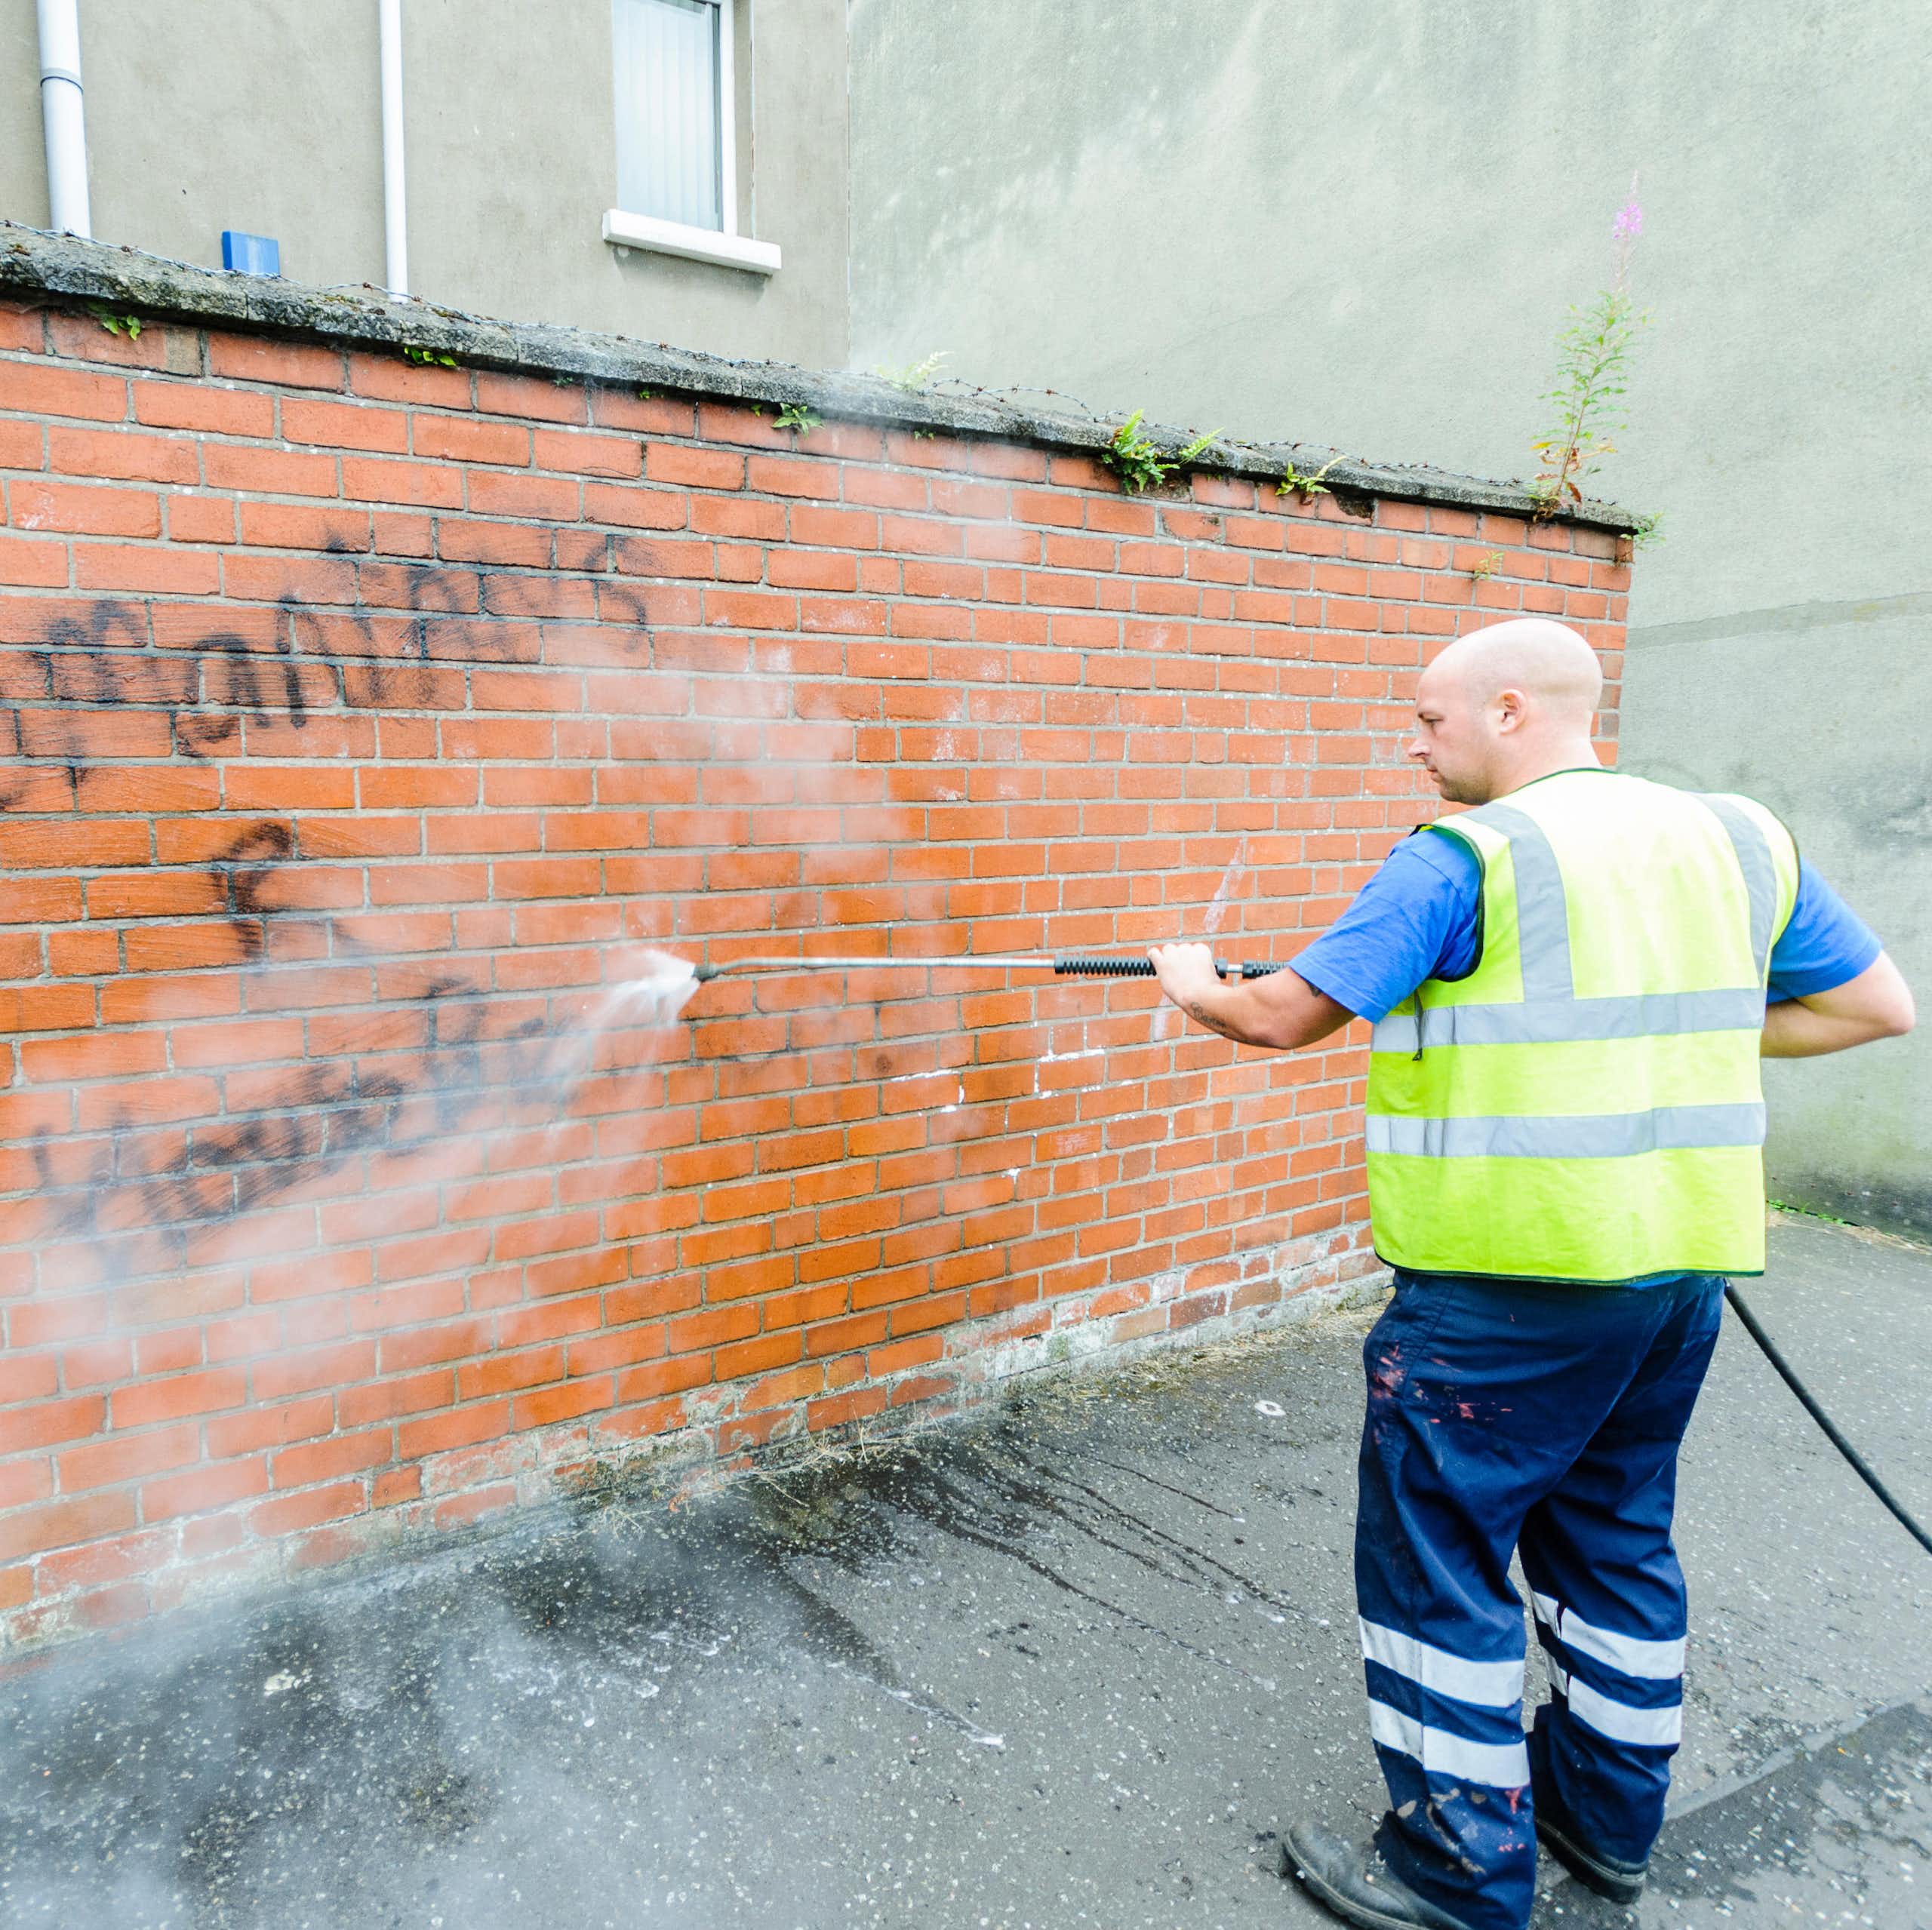 Hateful graffiti blights communities and it’s something we need to tackle urgently